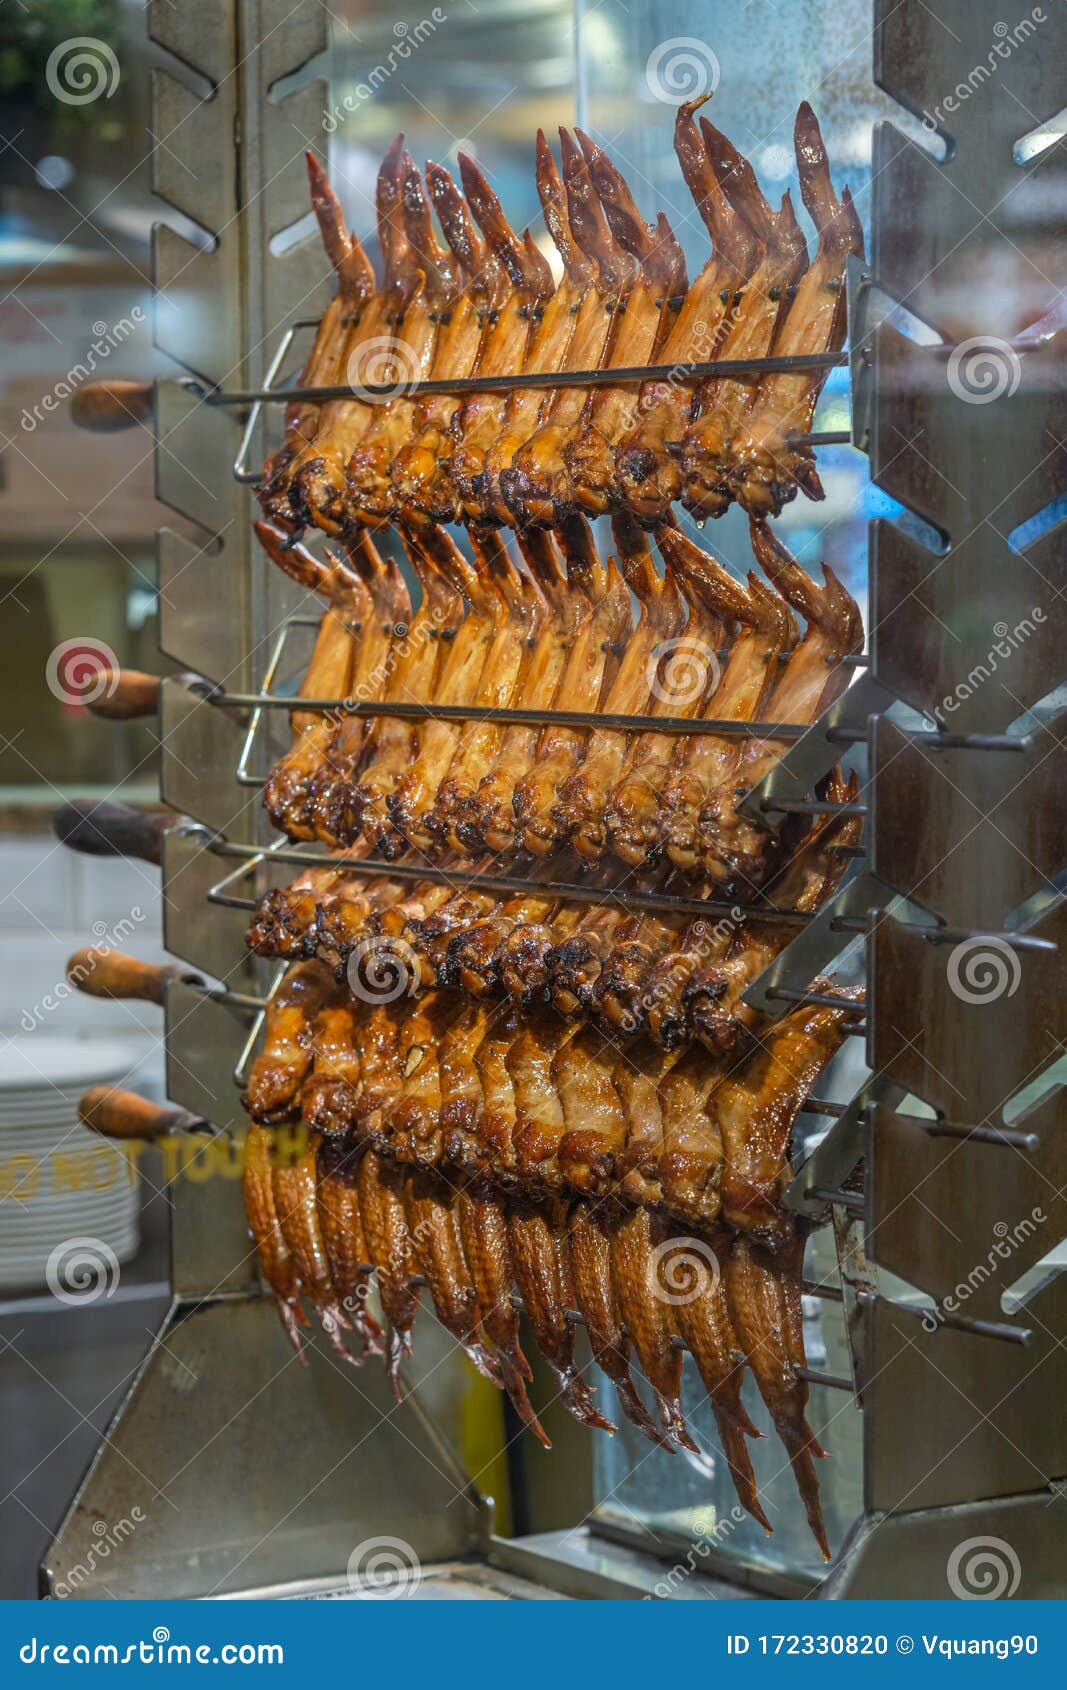 2+ Thousand Chicken Grill Machine Royalty-Free Images, Stock Photos &  Pictures